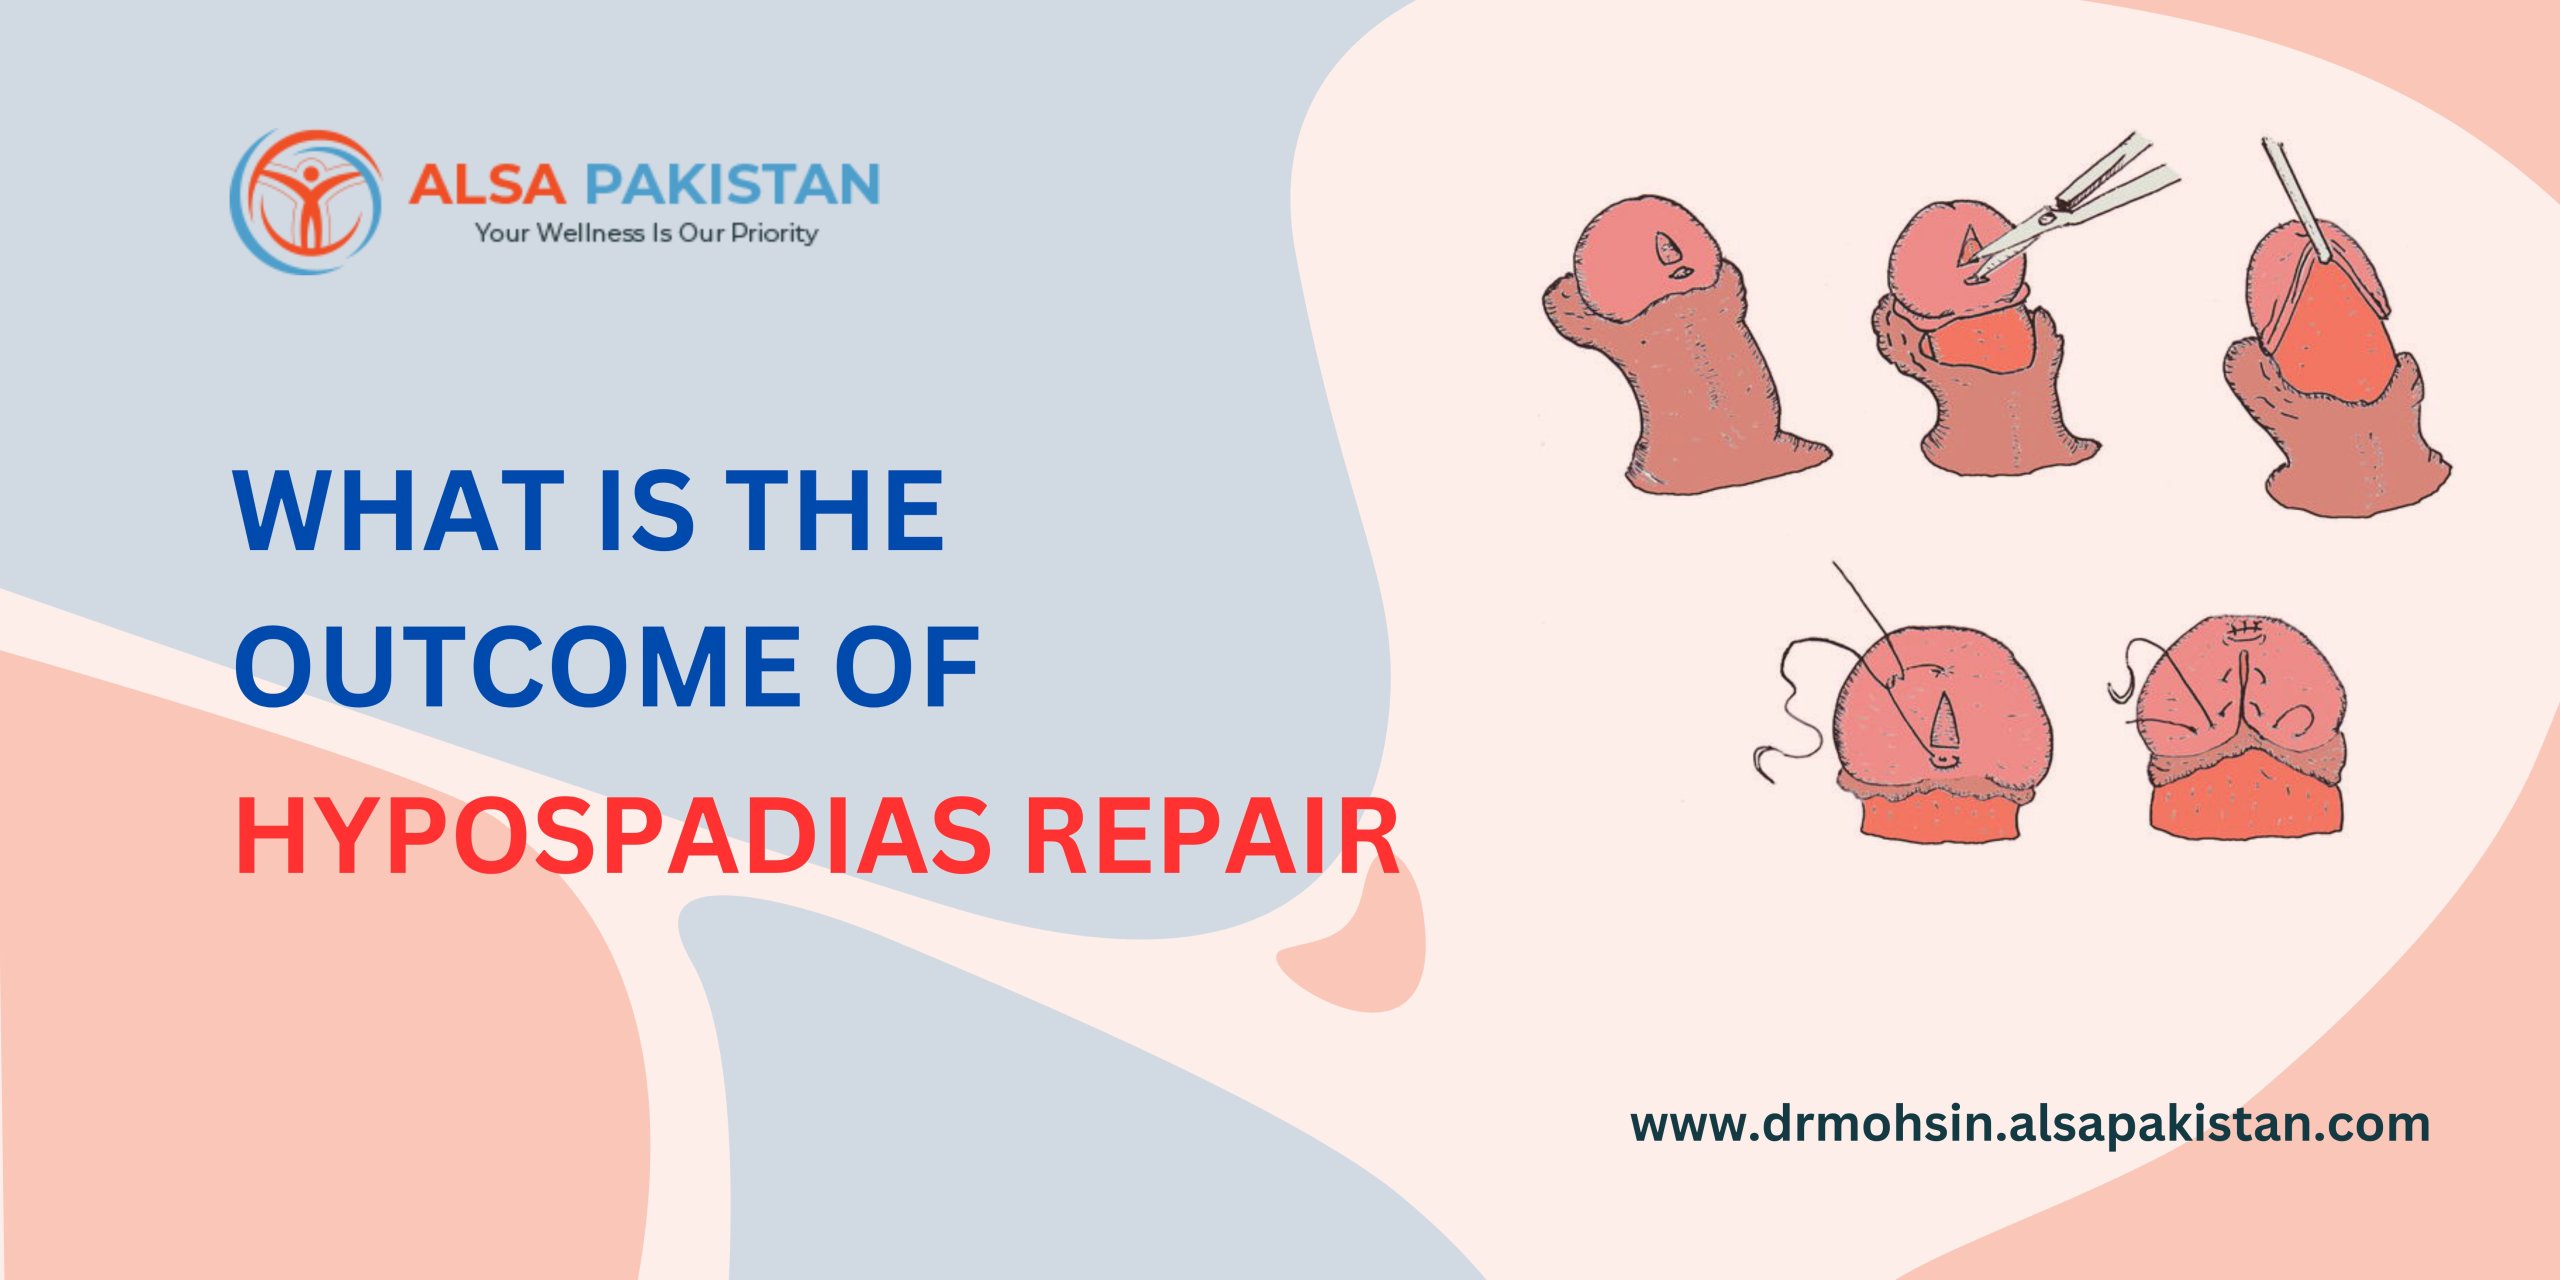 What is the outcome of hypospadias repair